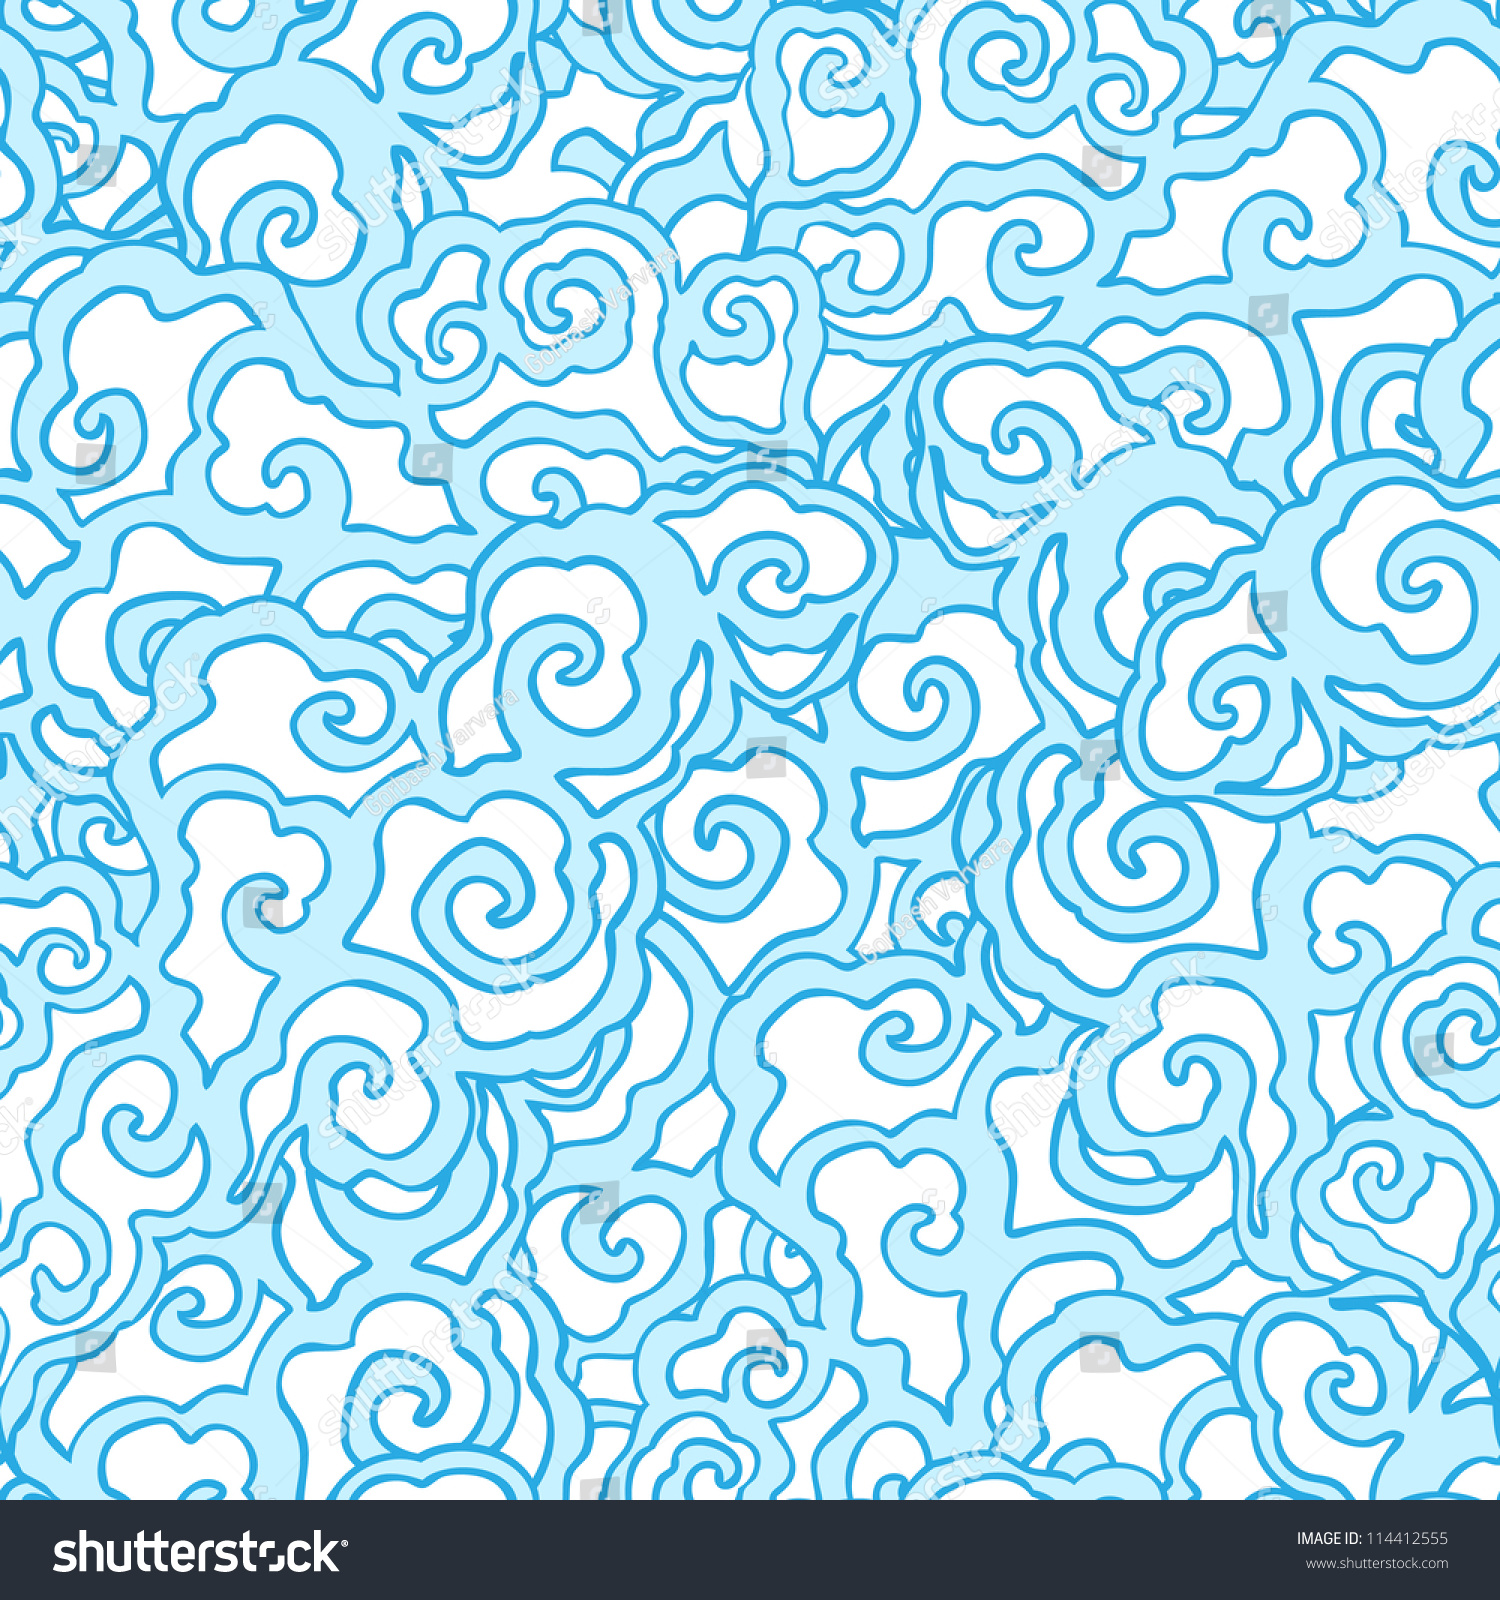 Vector Seamless Blue And White Abstract Hand-Drawn Pattern With Chinese ...